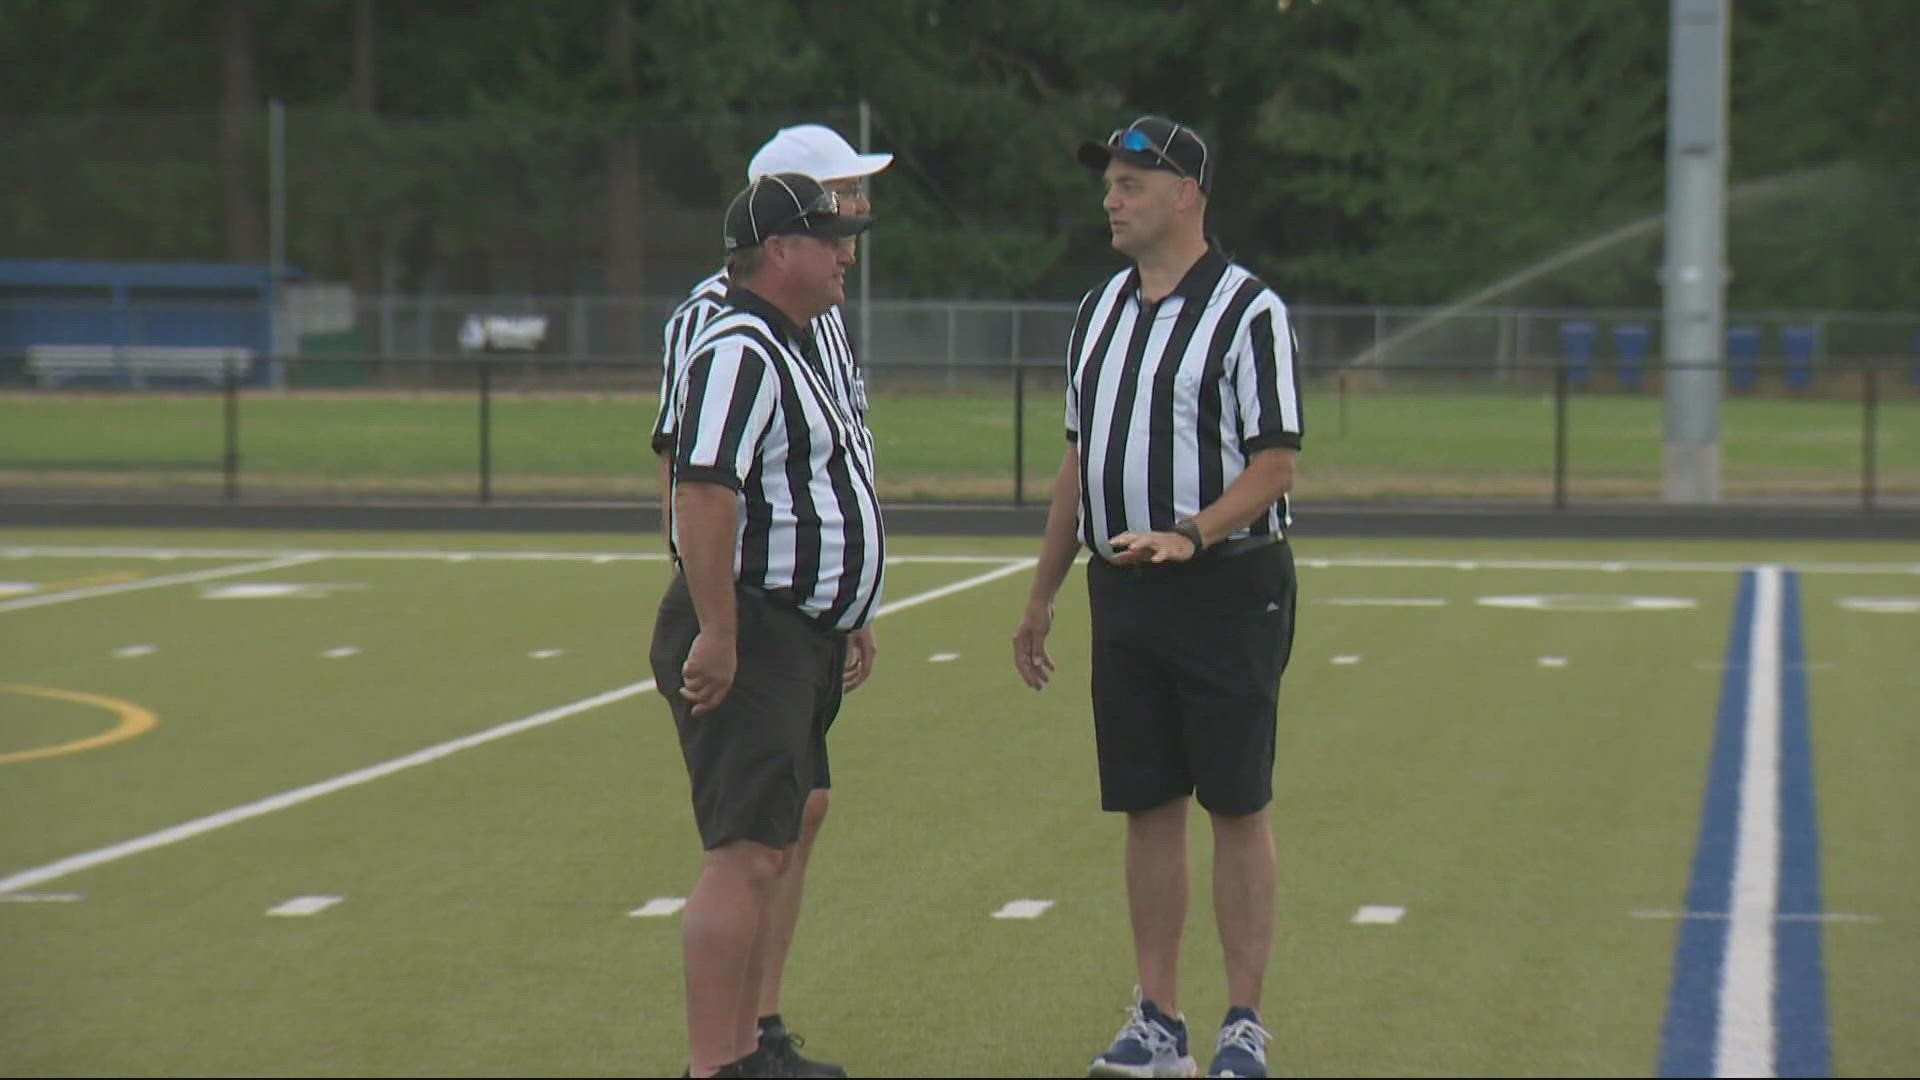 The high school sports season will kick off soon, but Oregon is dealing with a shortage of referees. Matt Park looks into the numbers.